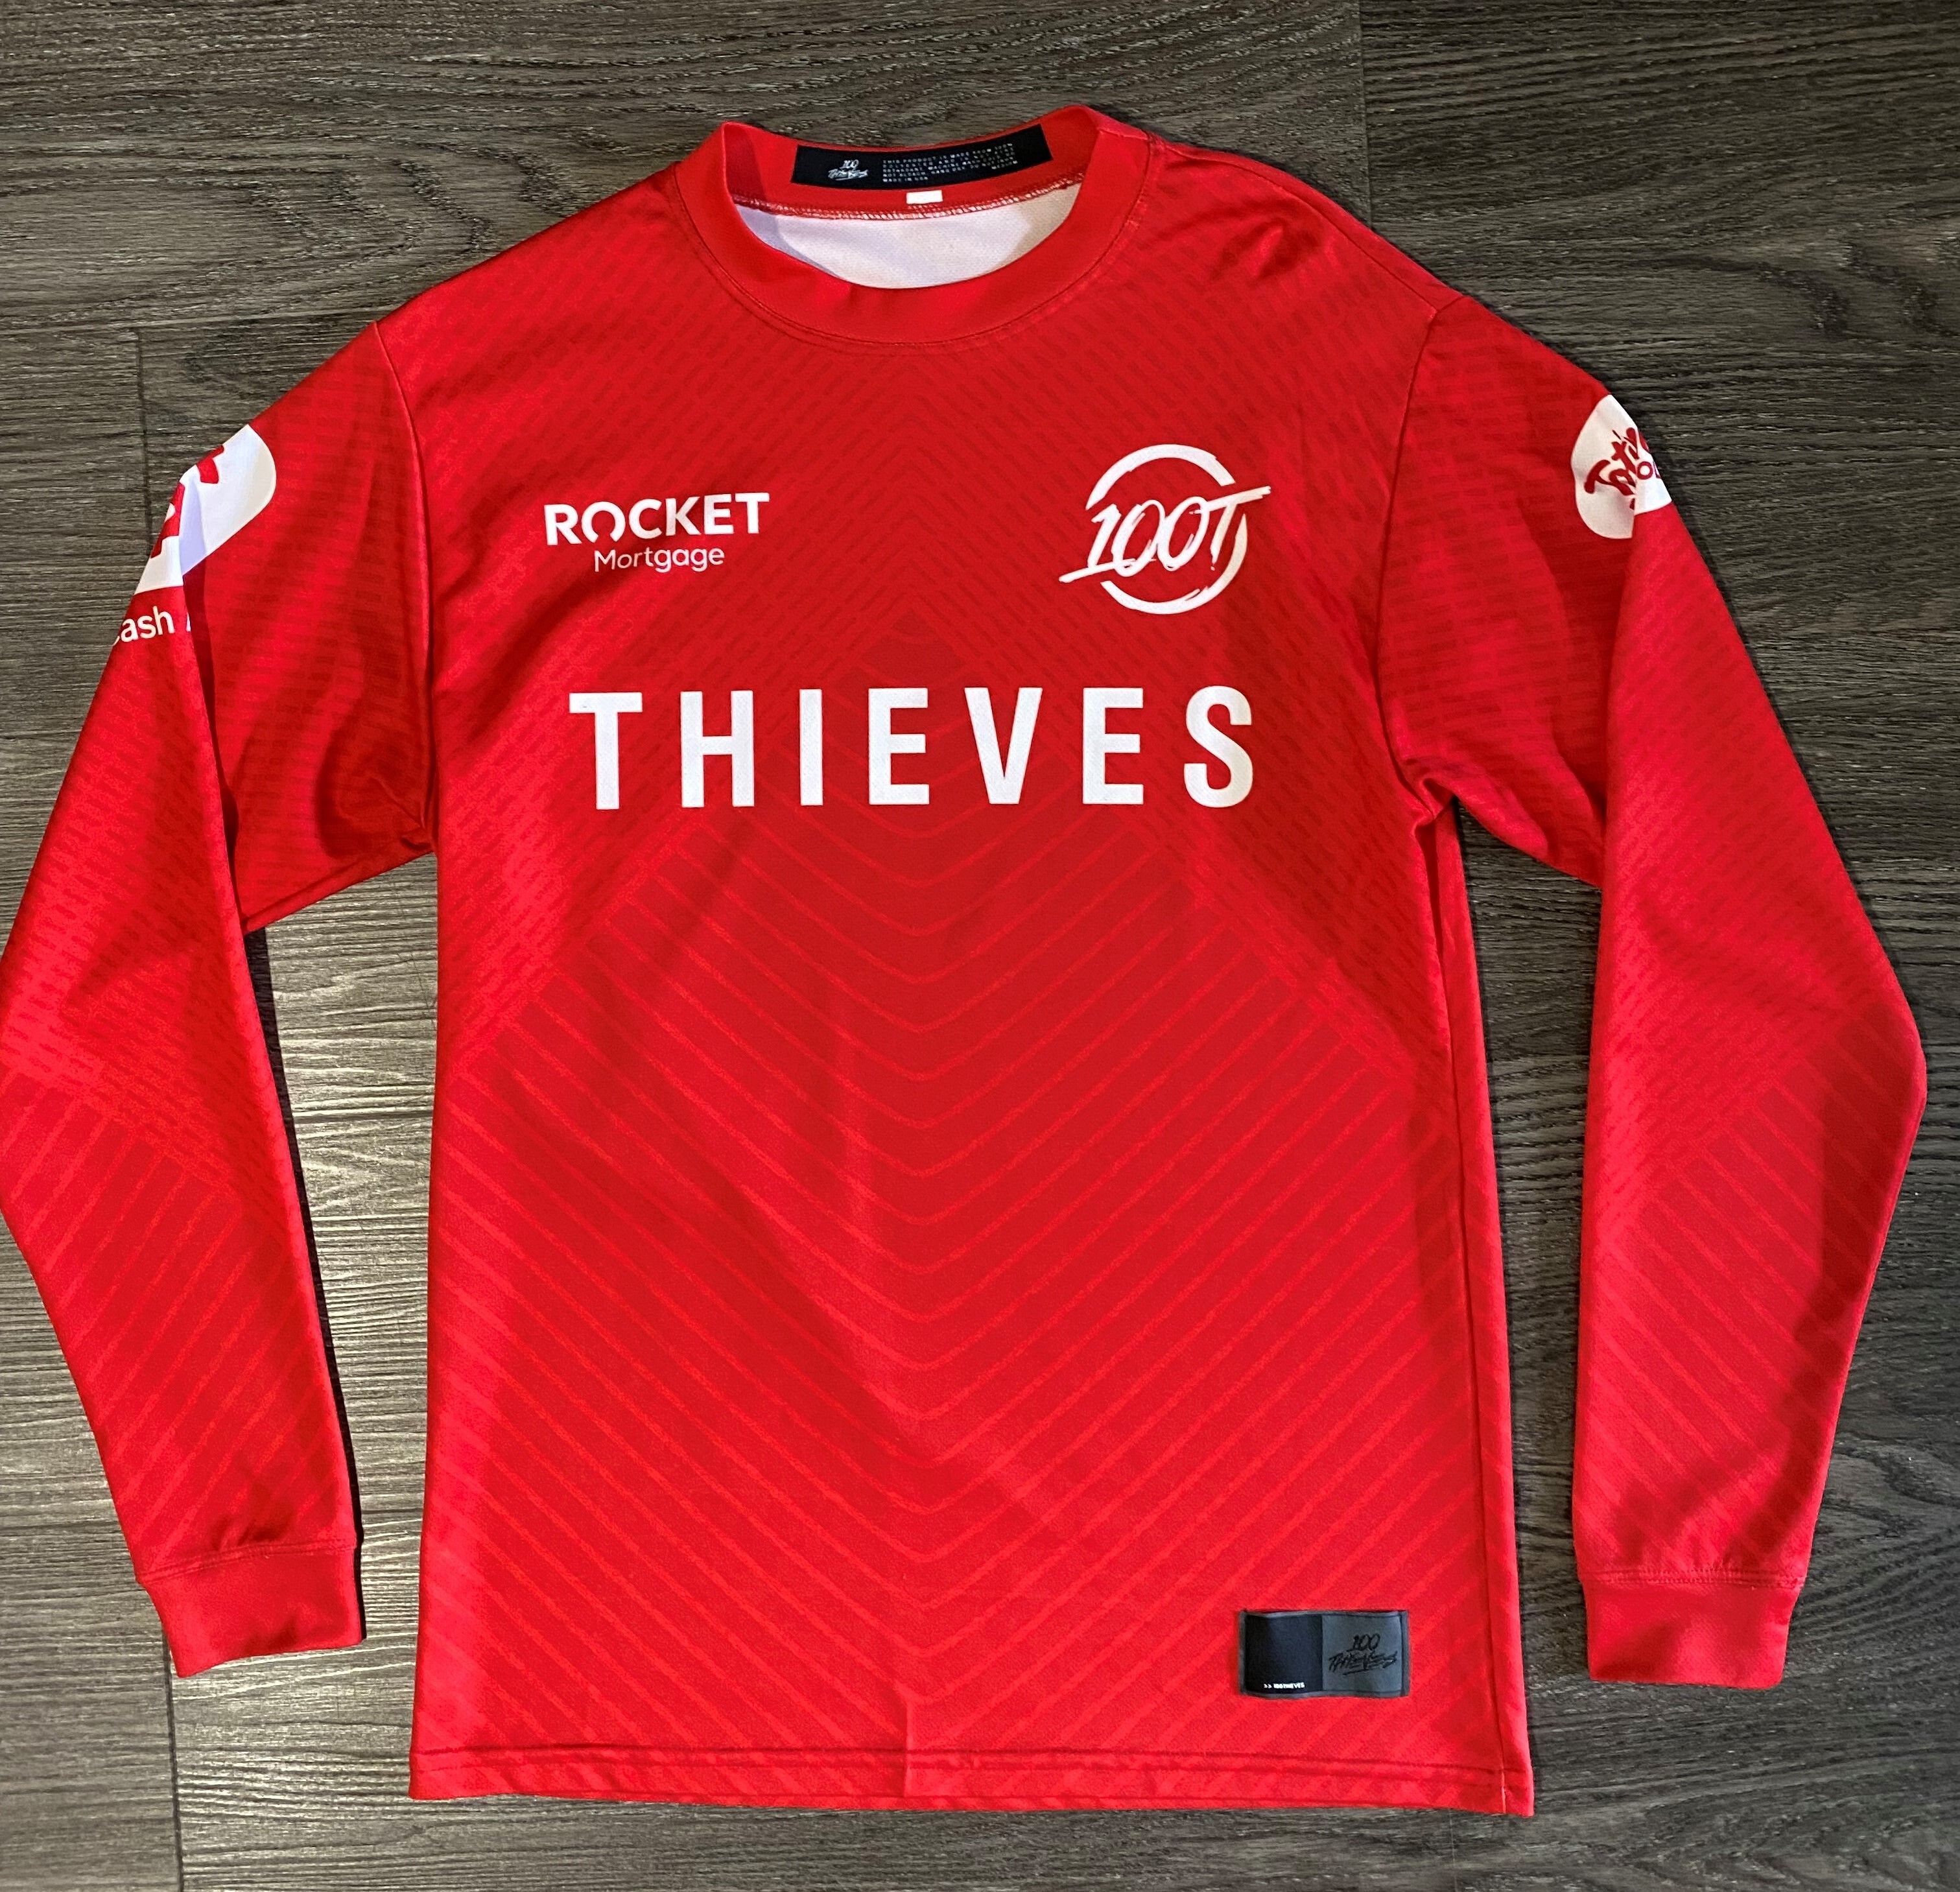 100 Thieves 100 Thieves 2020 Jersey Size US M / EU 48-50 / 2 - 1 Preview